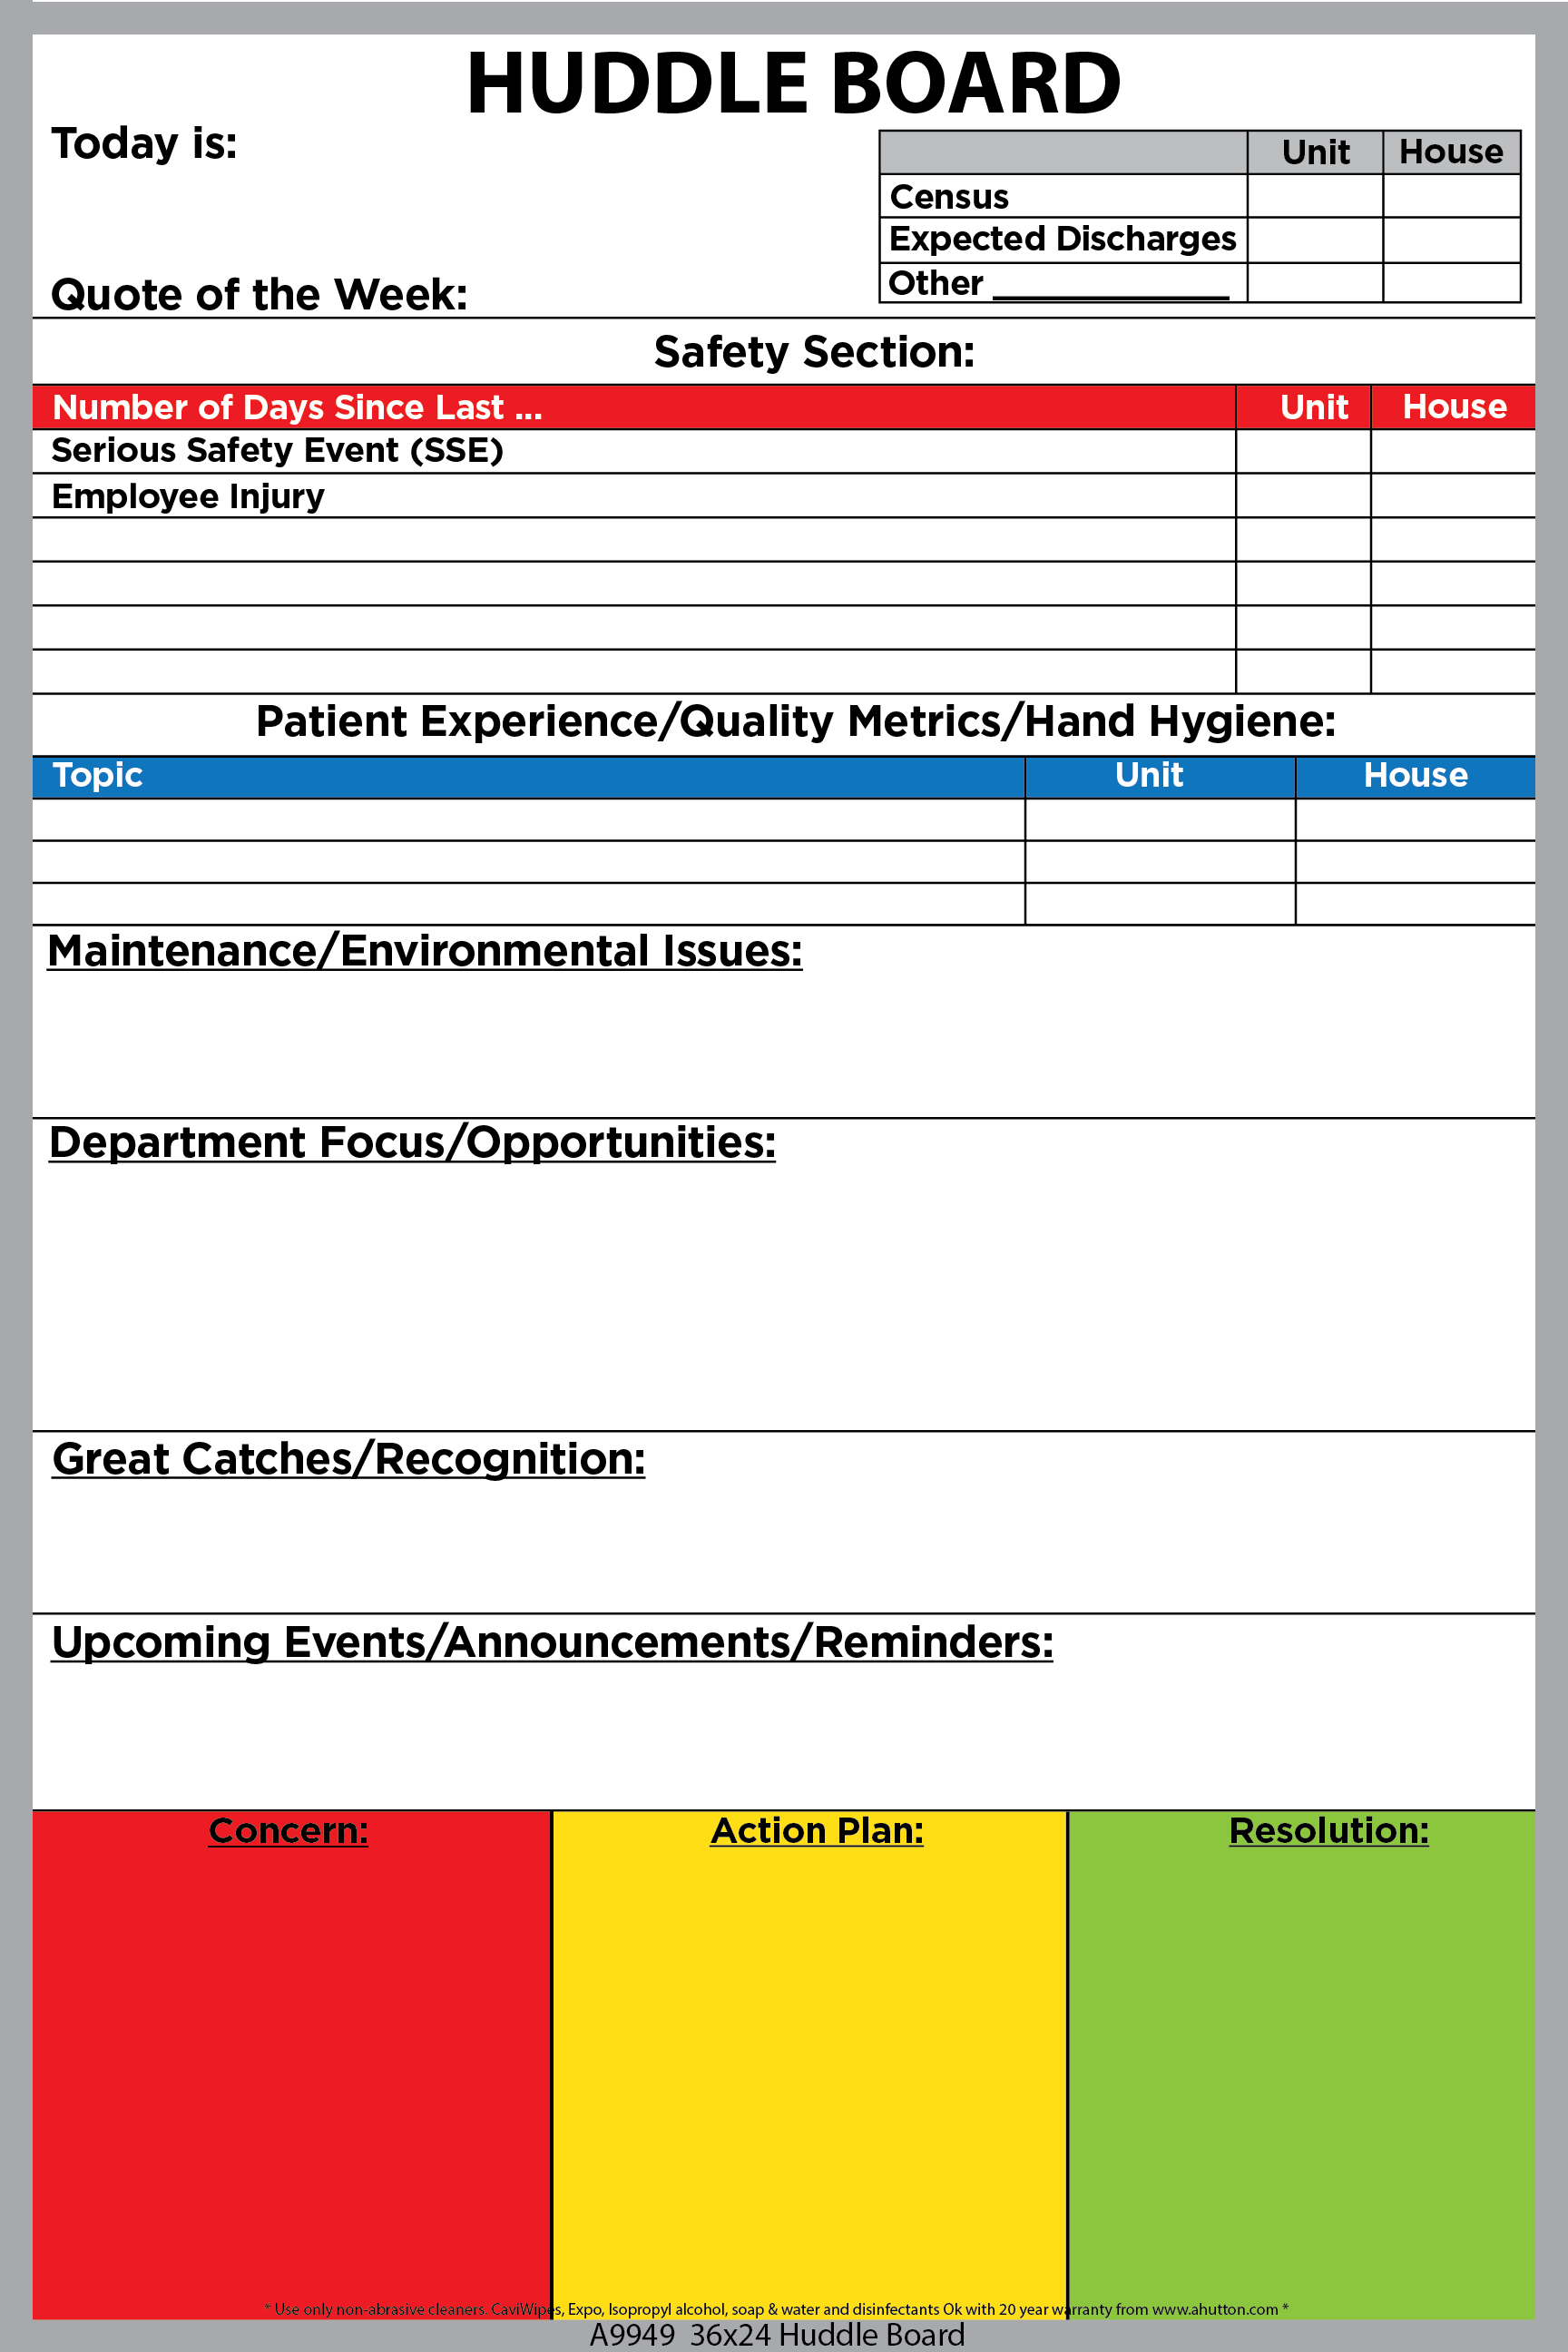 healthcare-daily-huddle-template